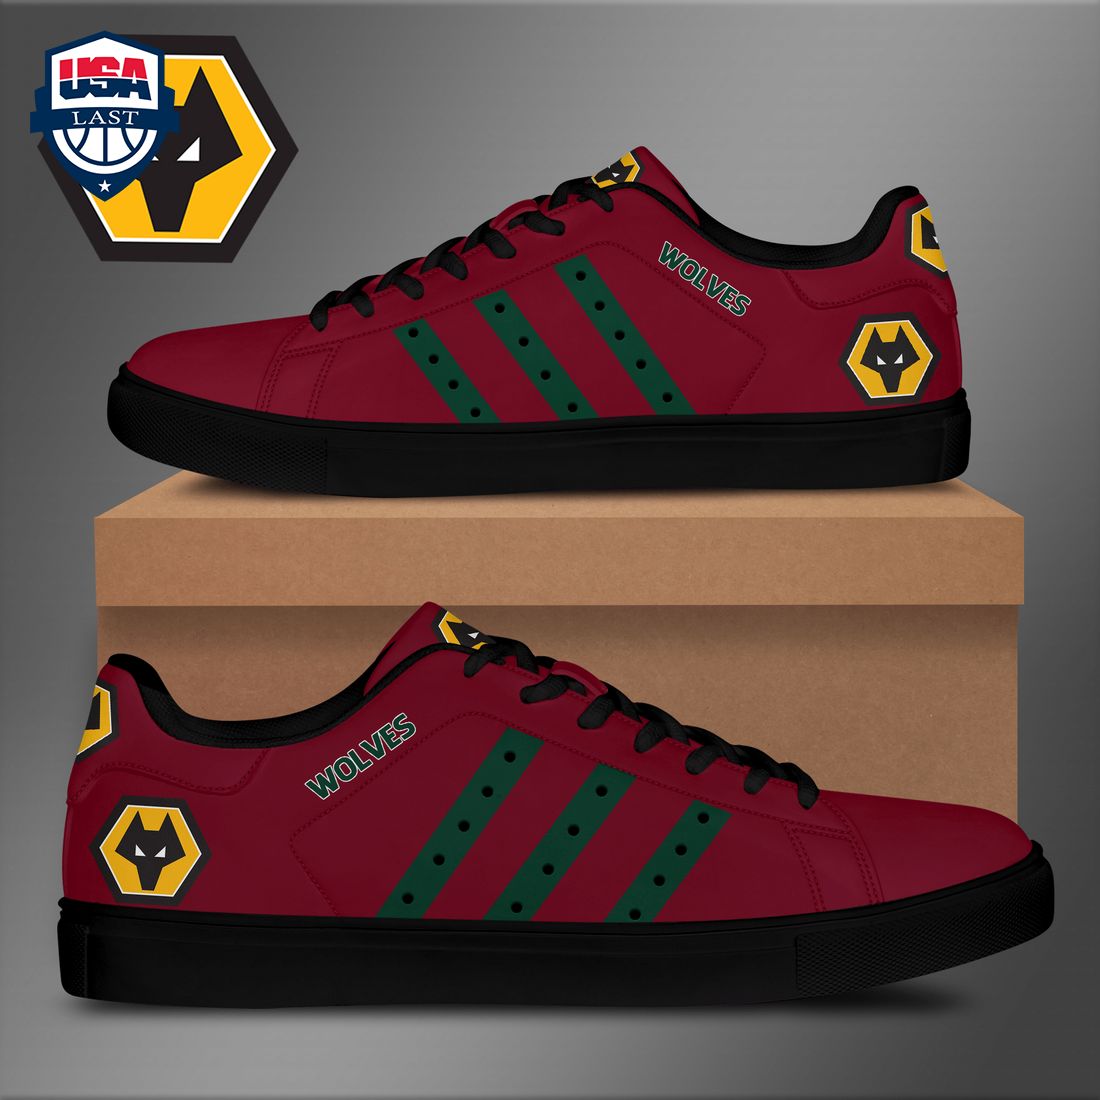 wolvehampton-wanderers-fc-forest-green-stripes-stan-smith-low-top-shoes-1-4noFK.jpg